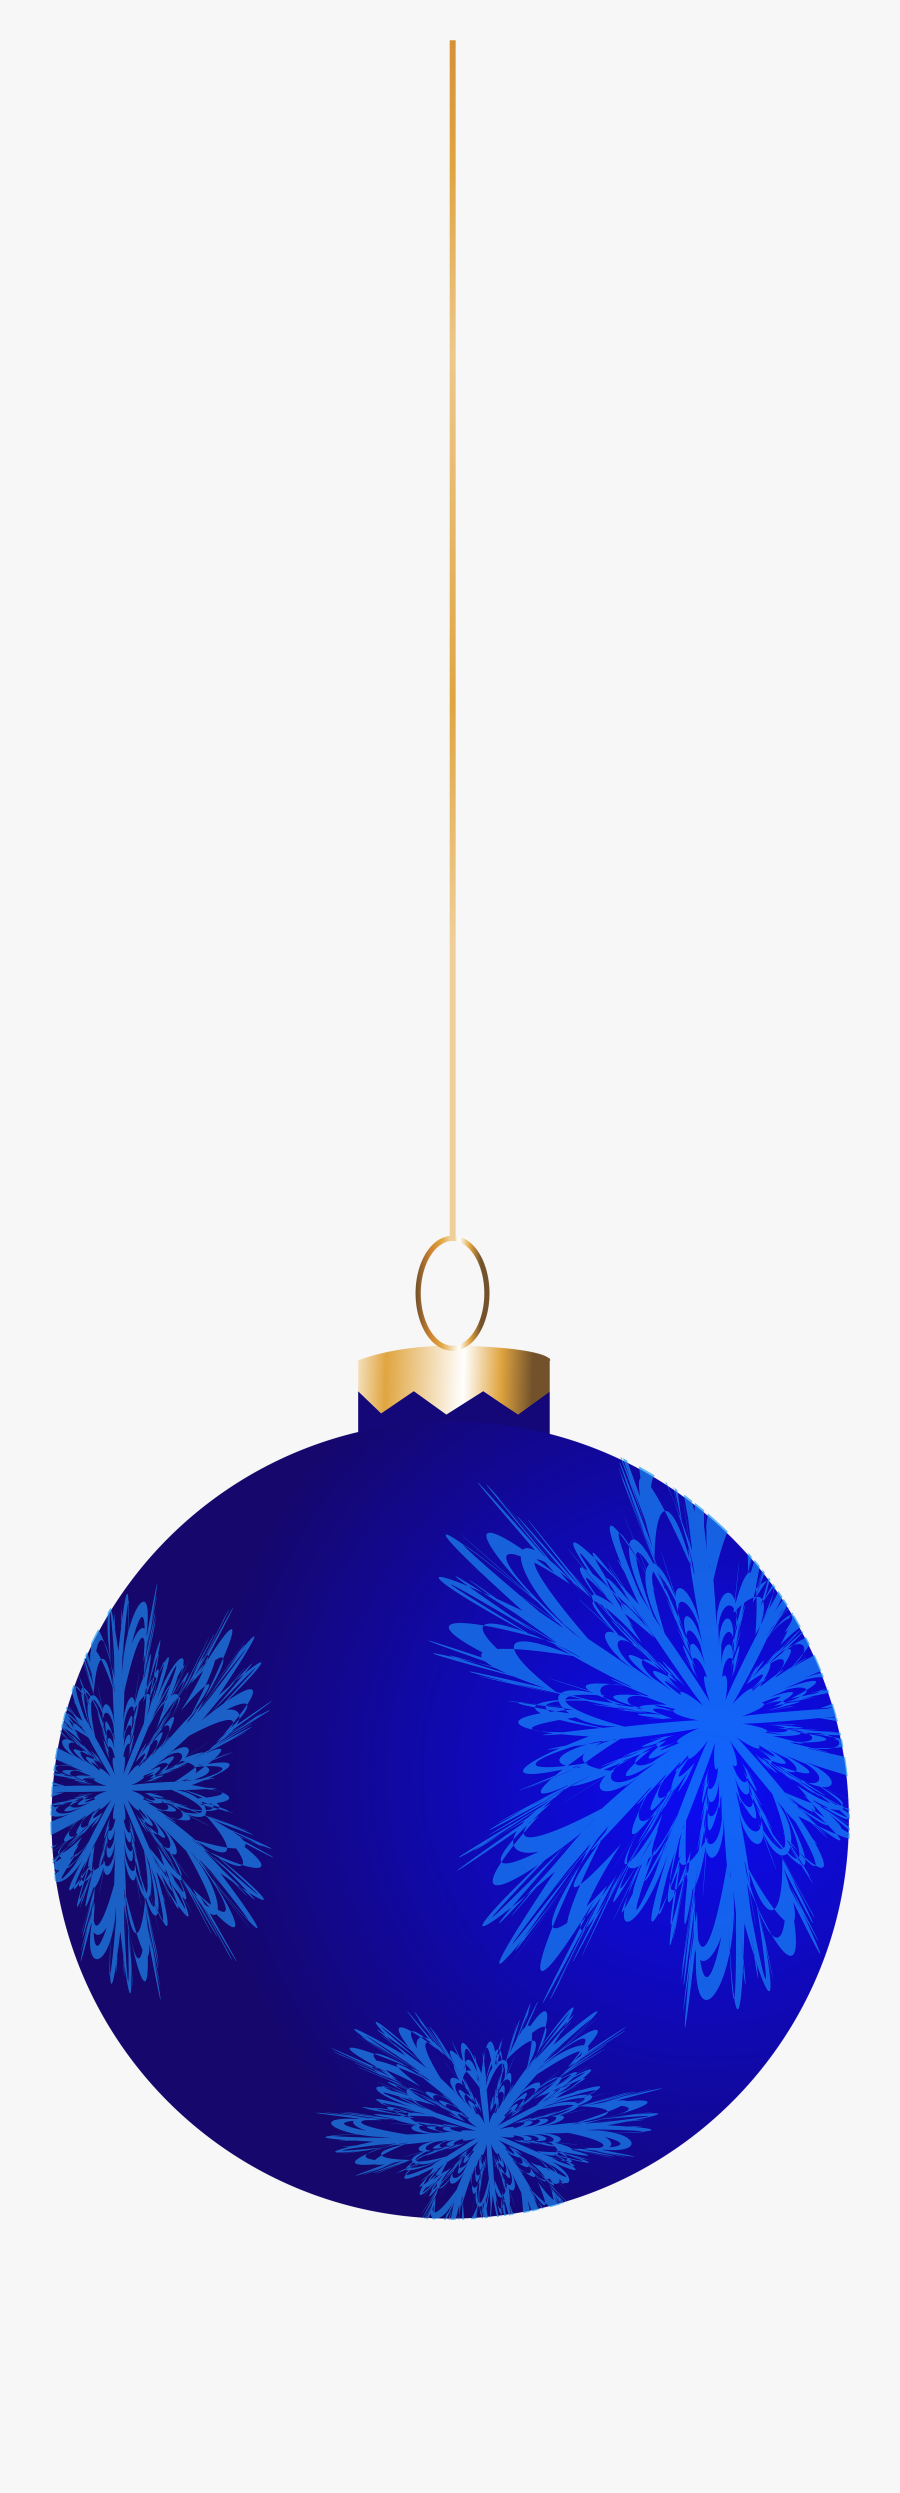 Blue Christmas Tree Ornament Png Clipart , Png Download - Australia Day, Transparent Clipart